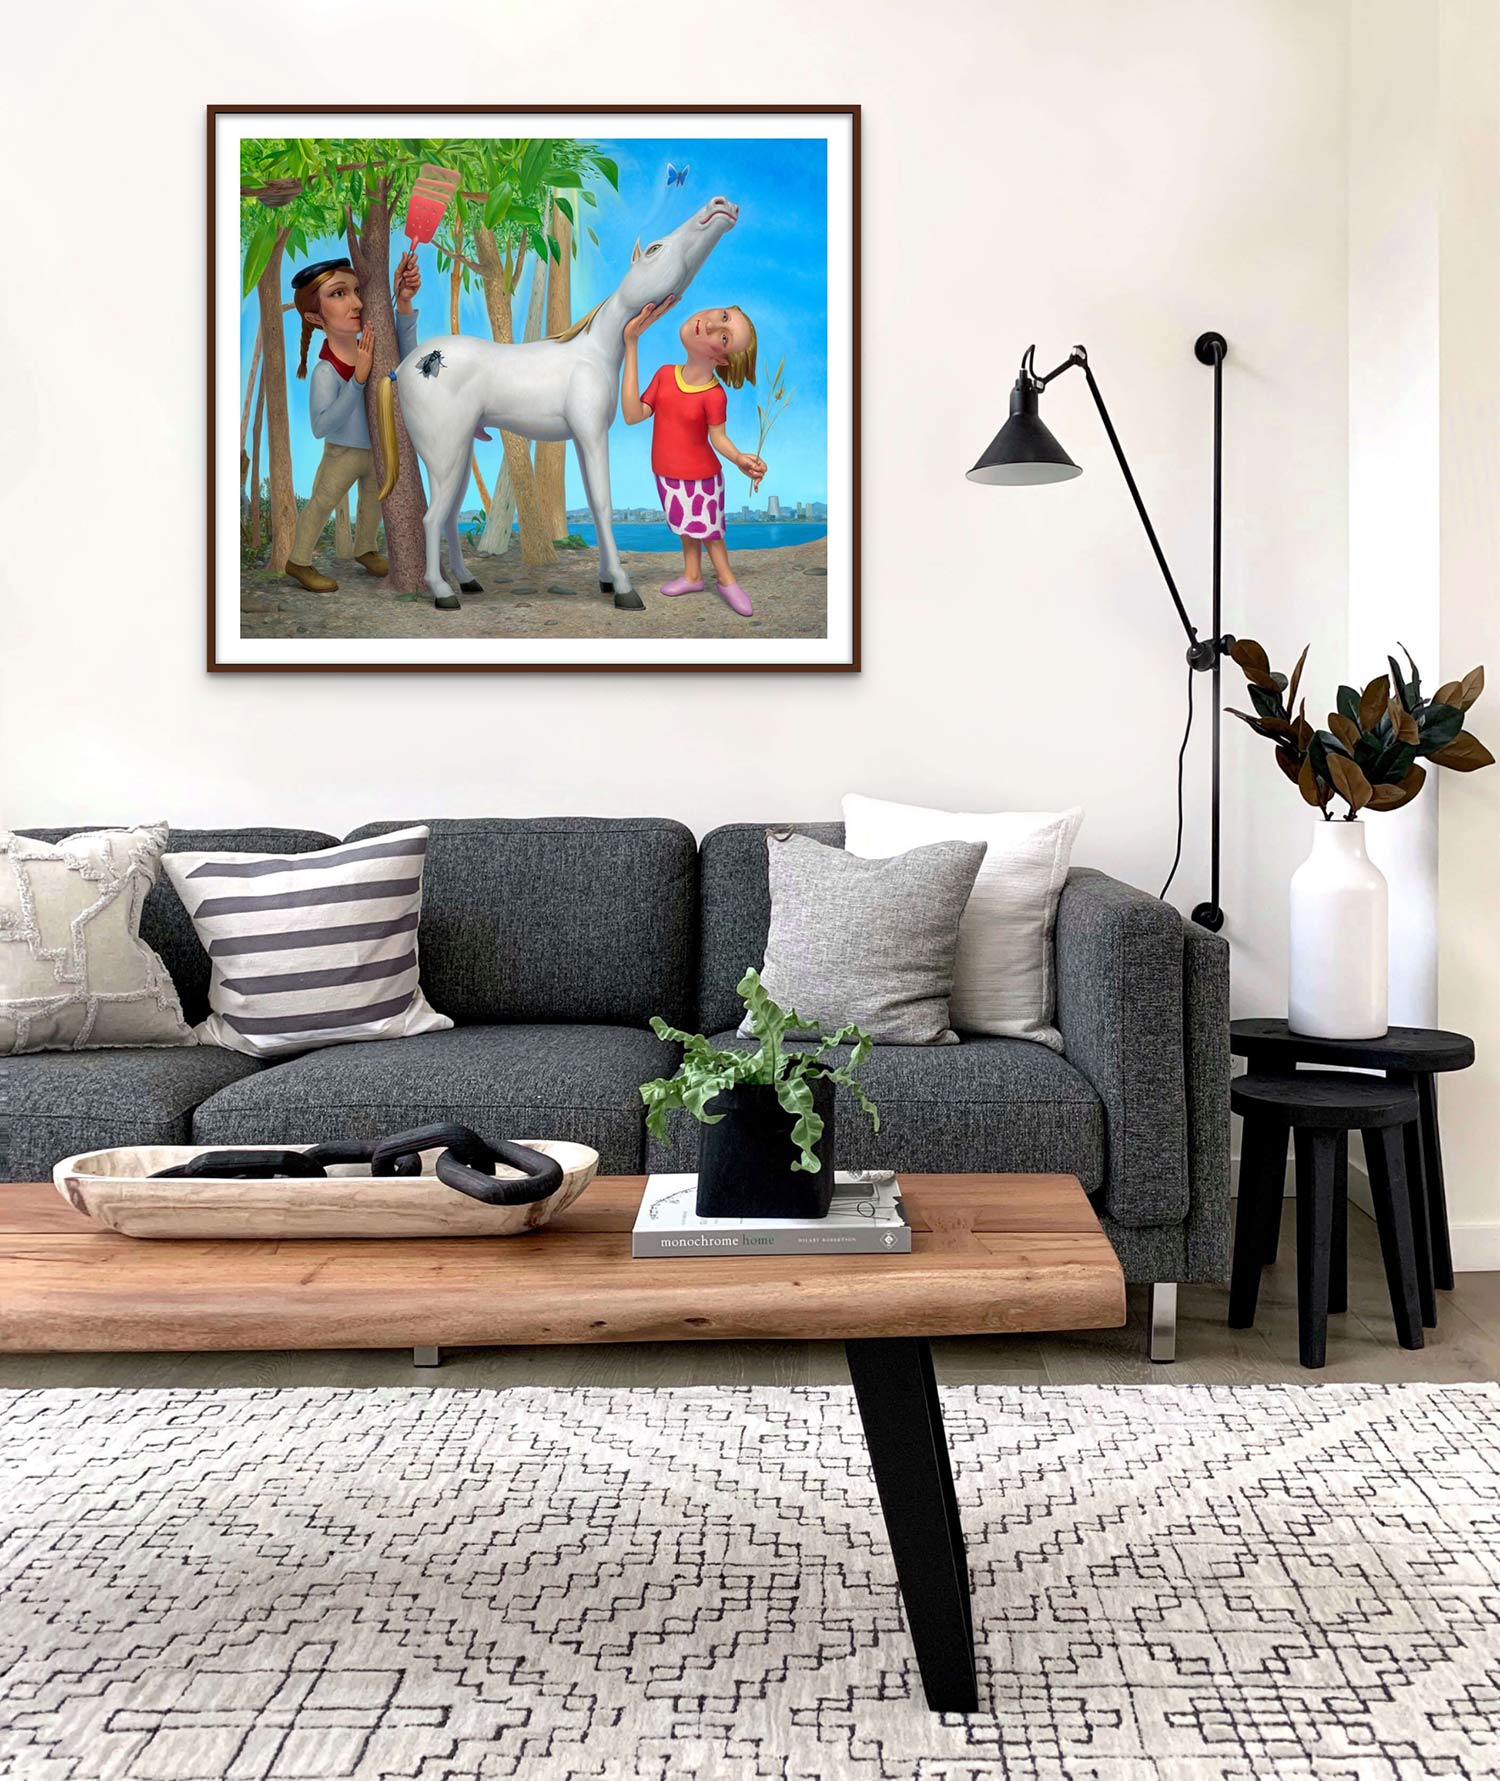 'White Pony Swat' fine art print in a living room, interior decoration in the style of casual modern chic monochrome